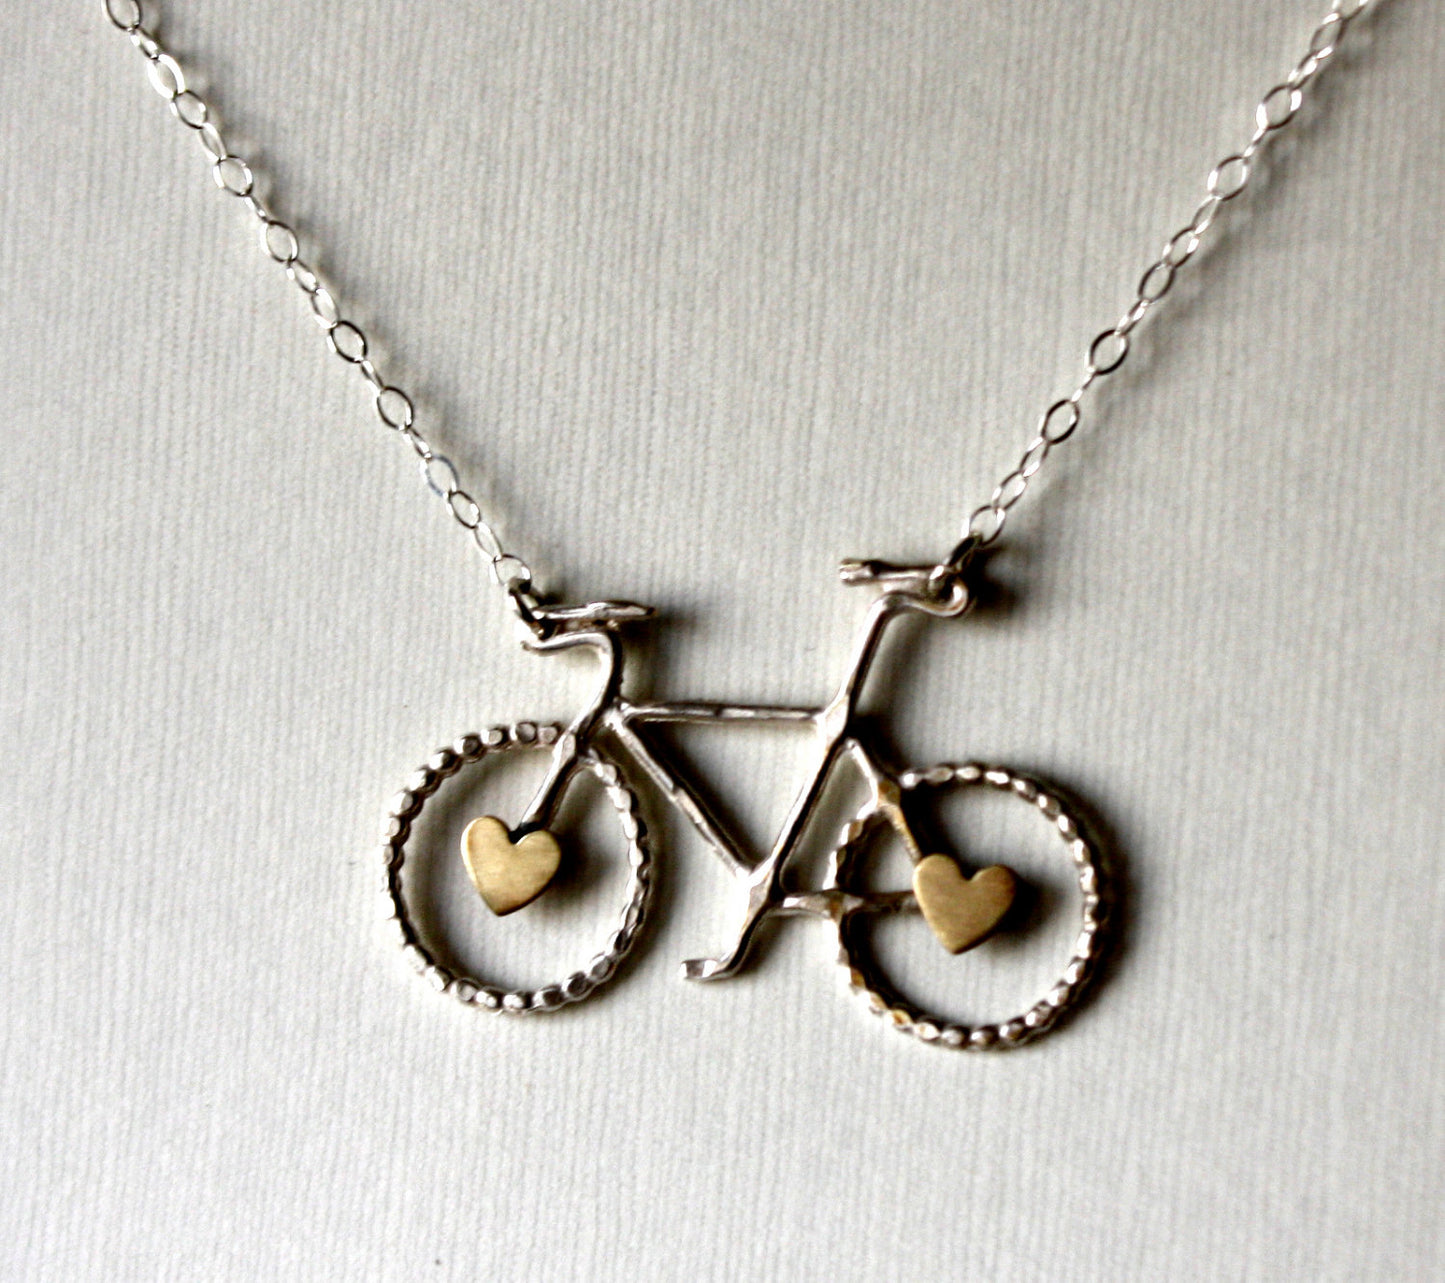 Ready to Ship- Le Petit Bike Necklace with Hearts by Rachel Pfeffer